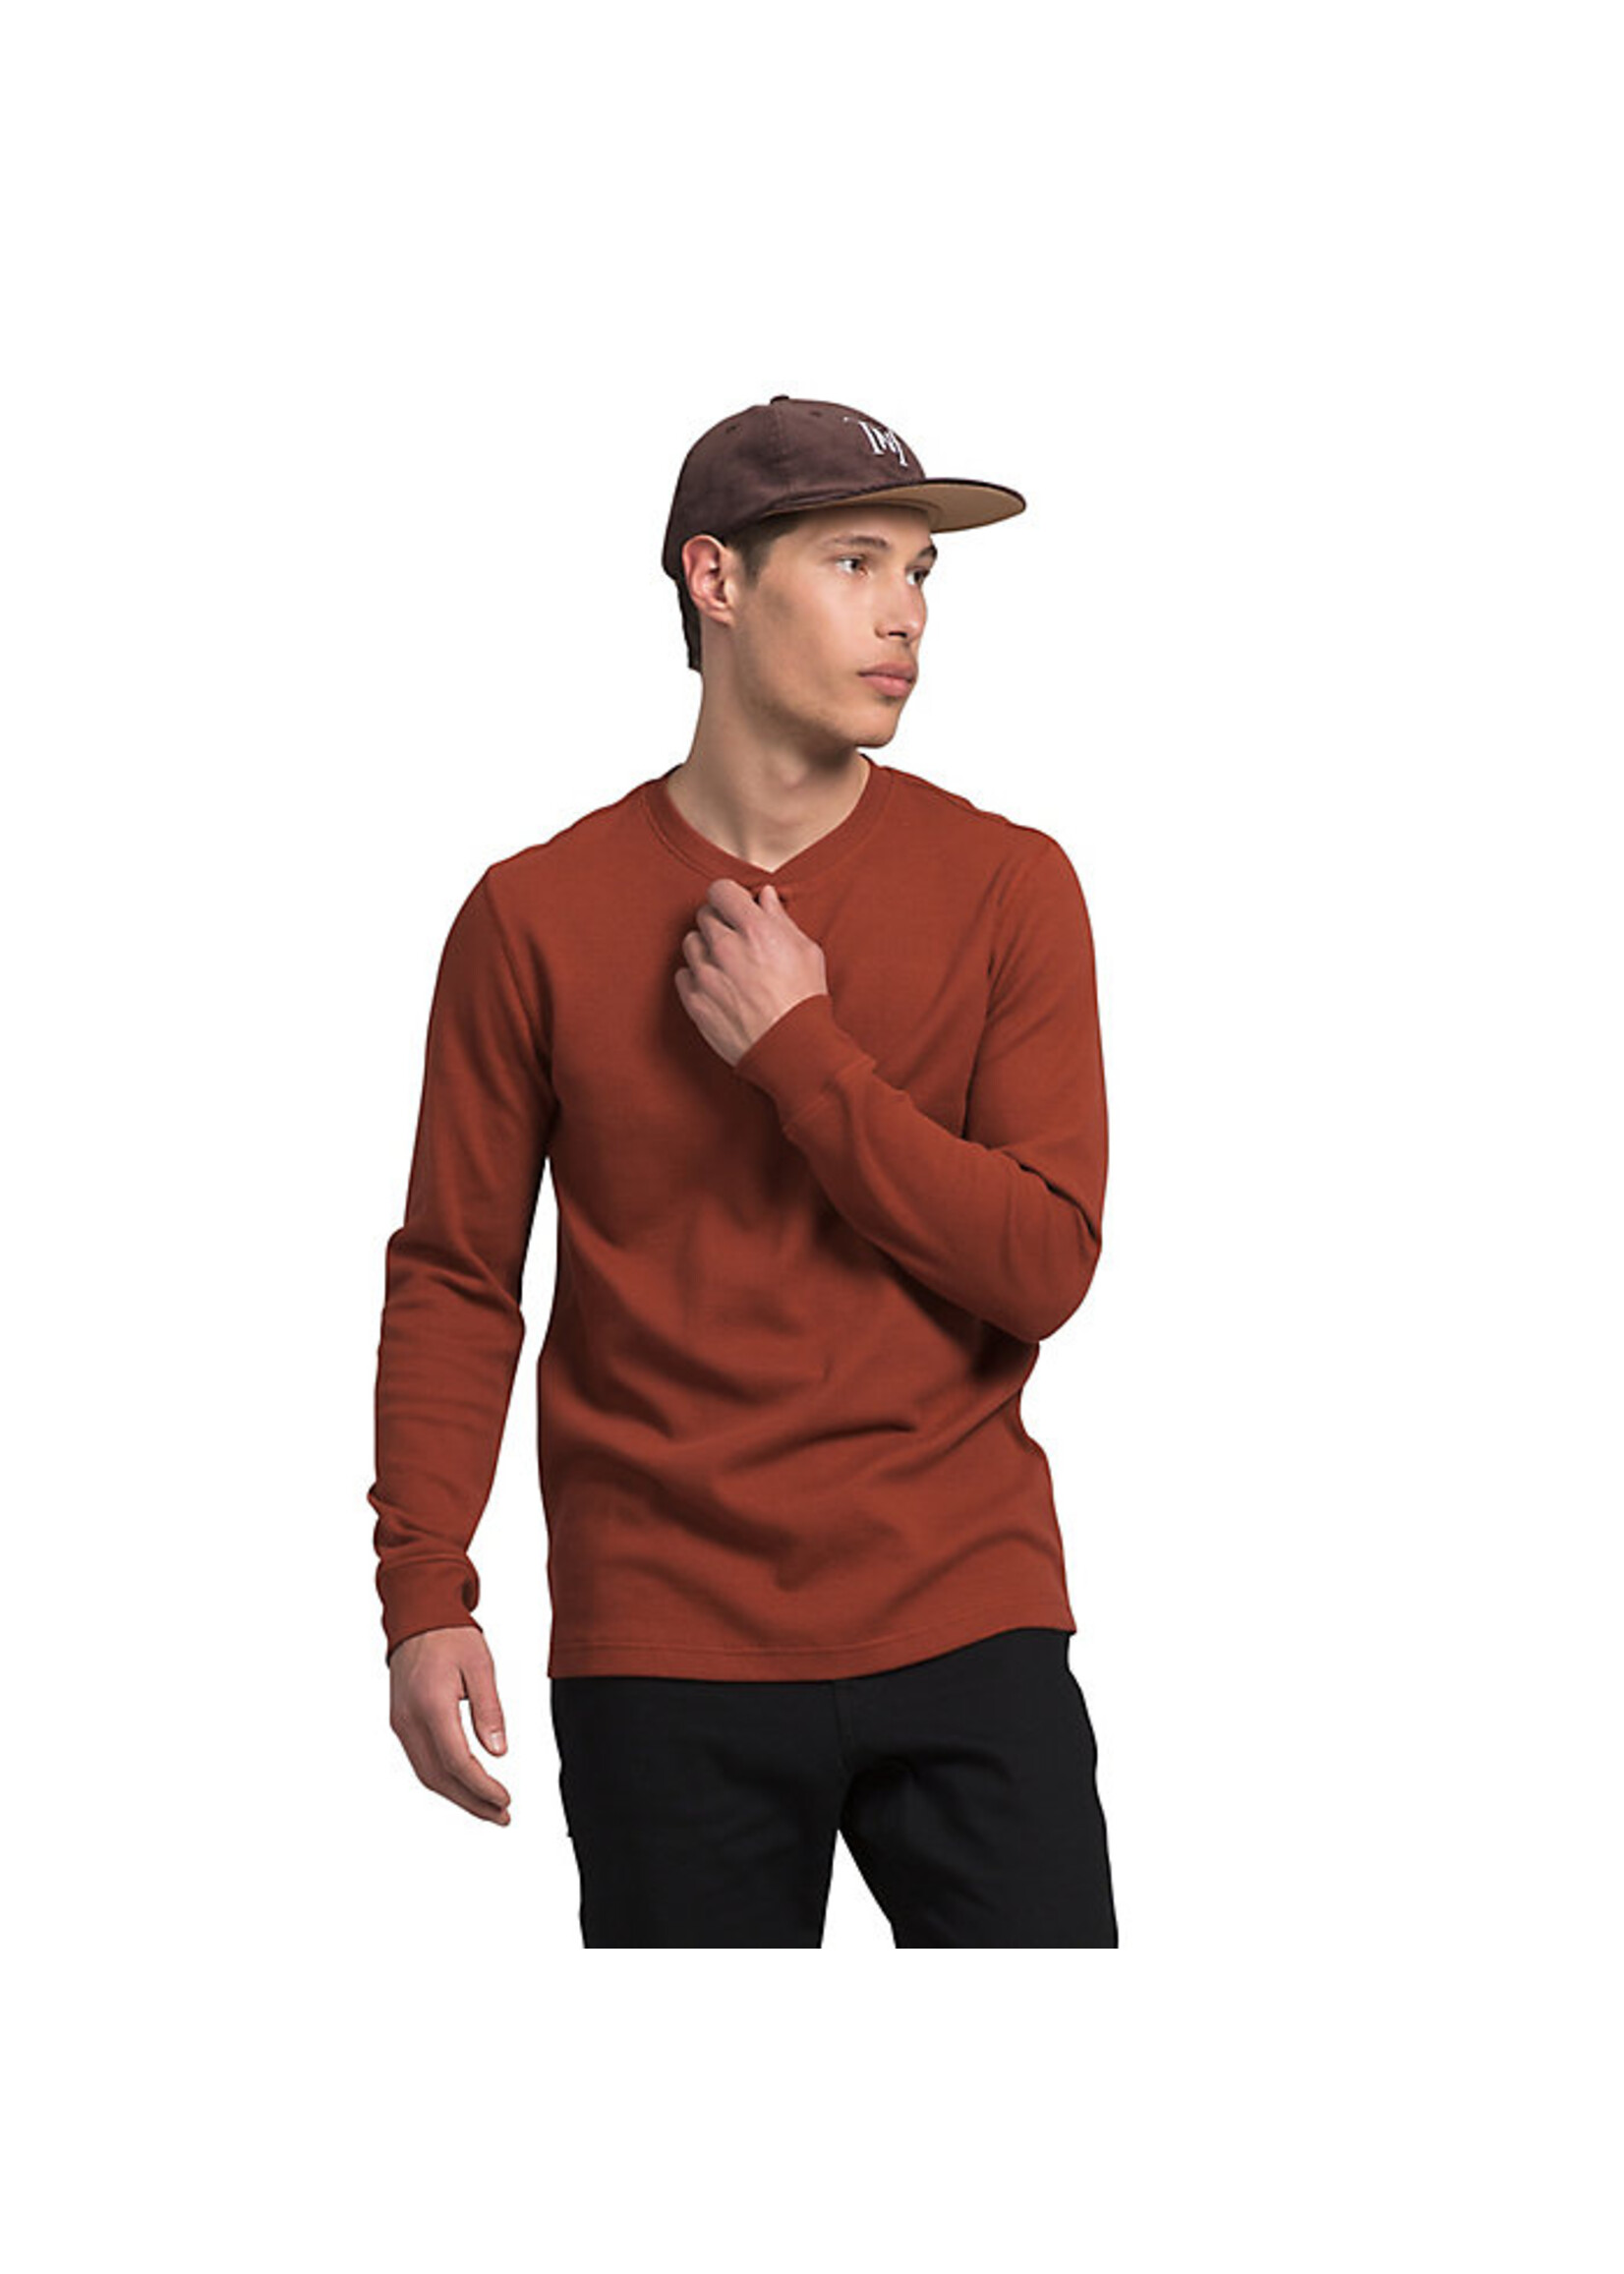 North Face North Face M's Terrain Waffle Henley